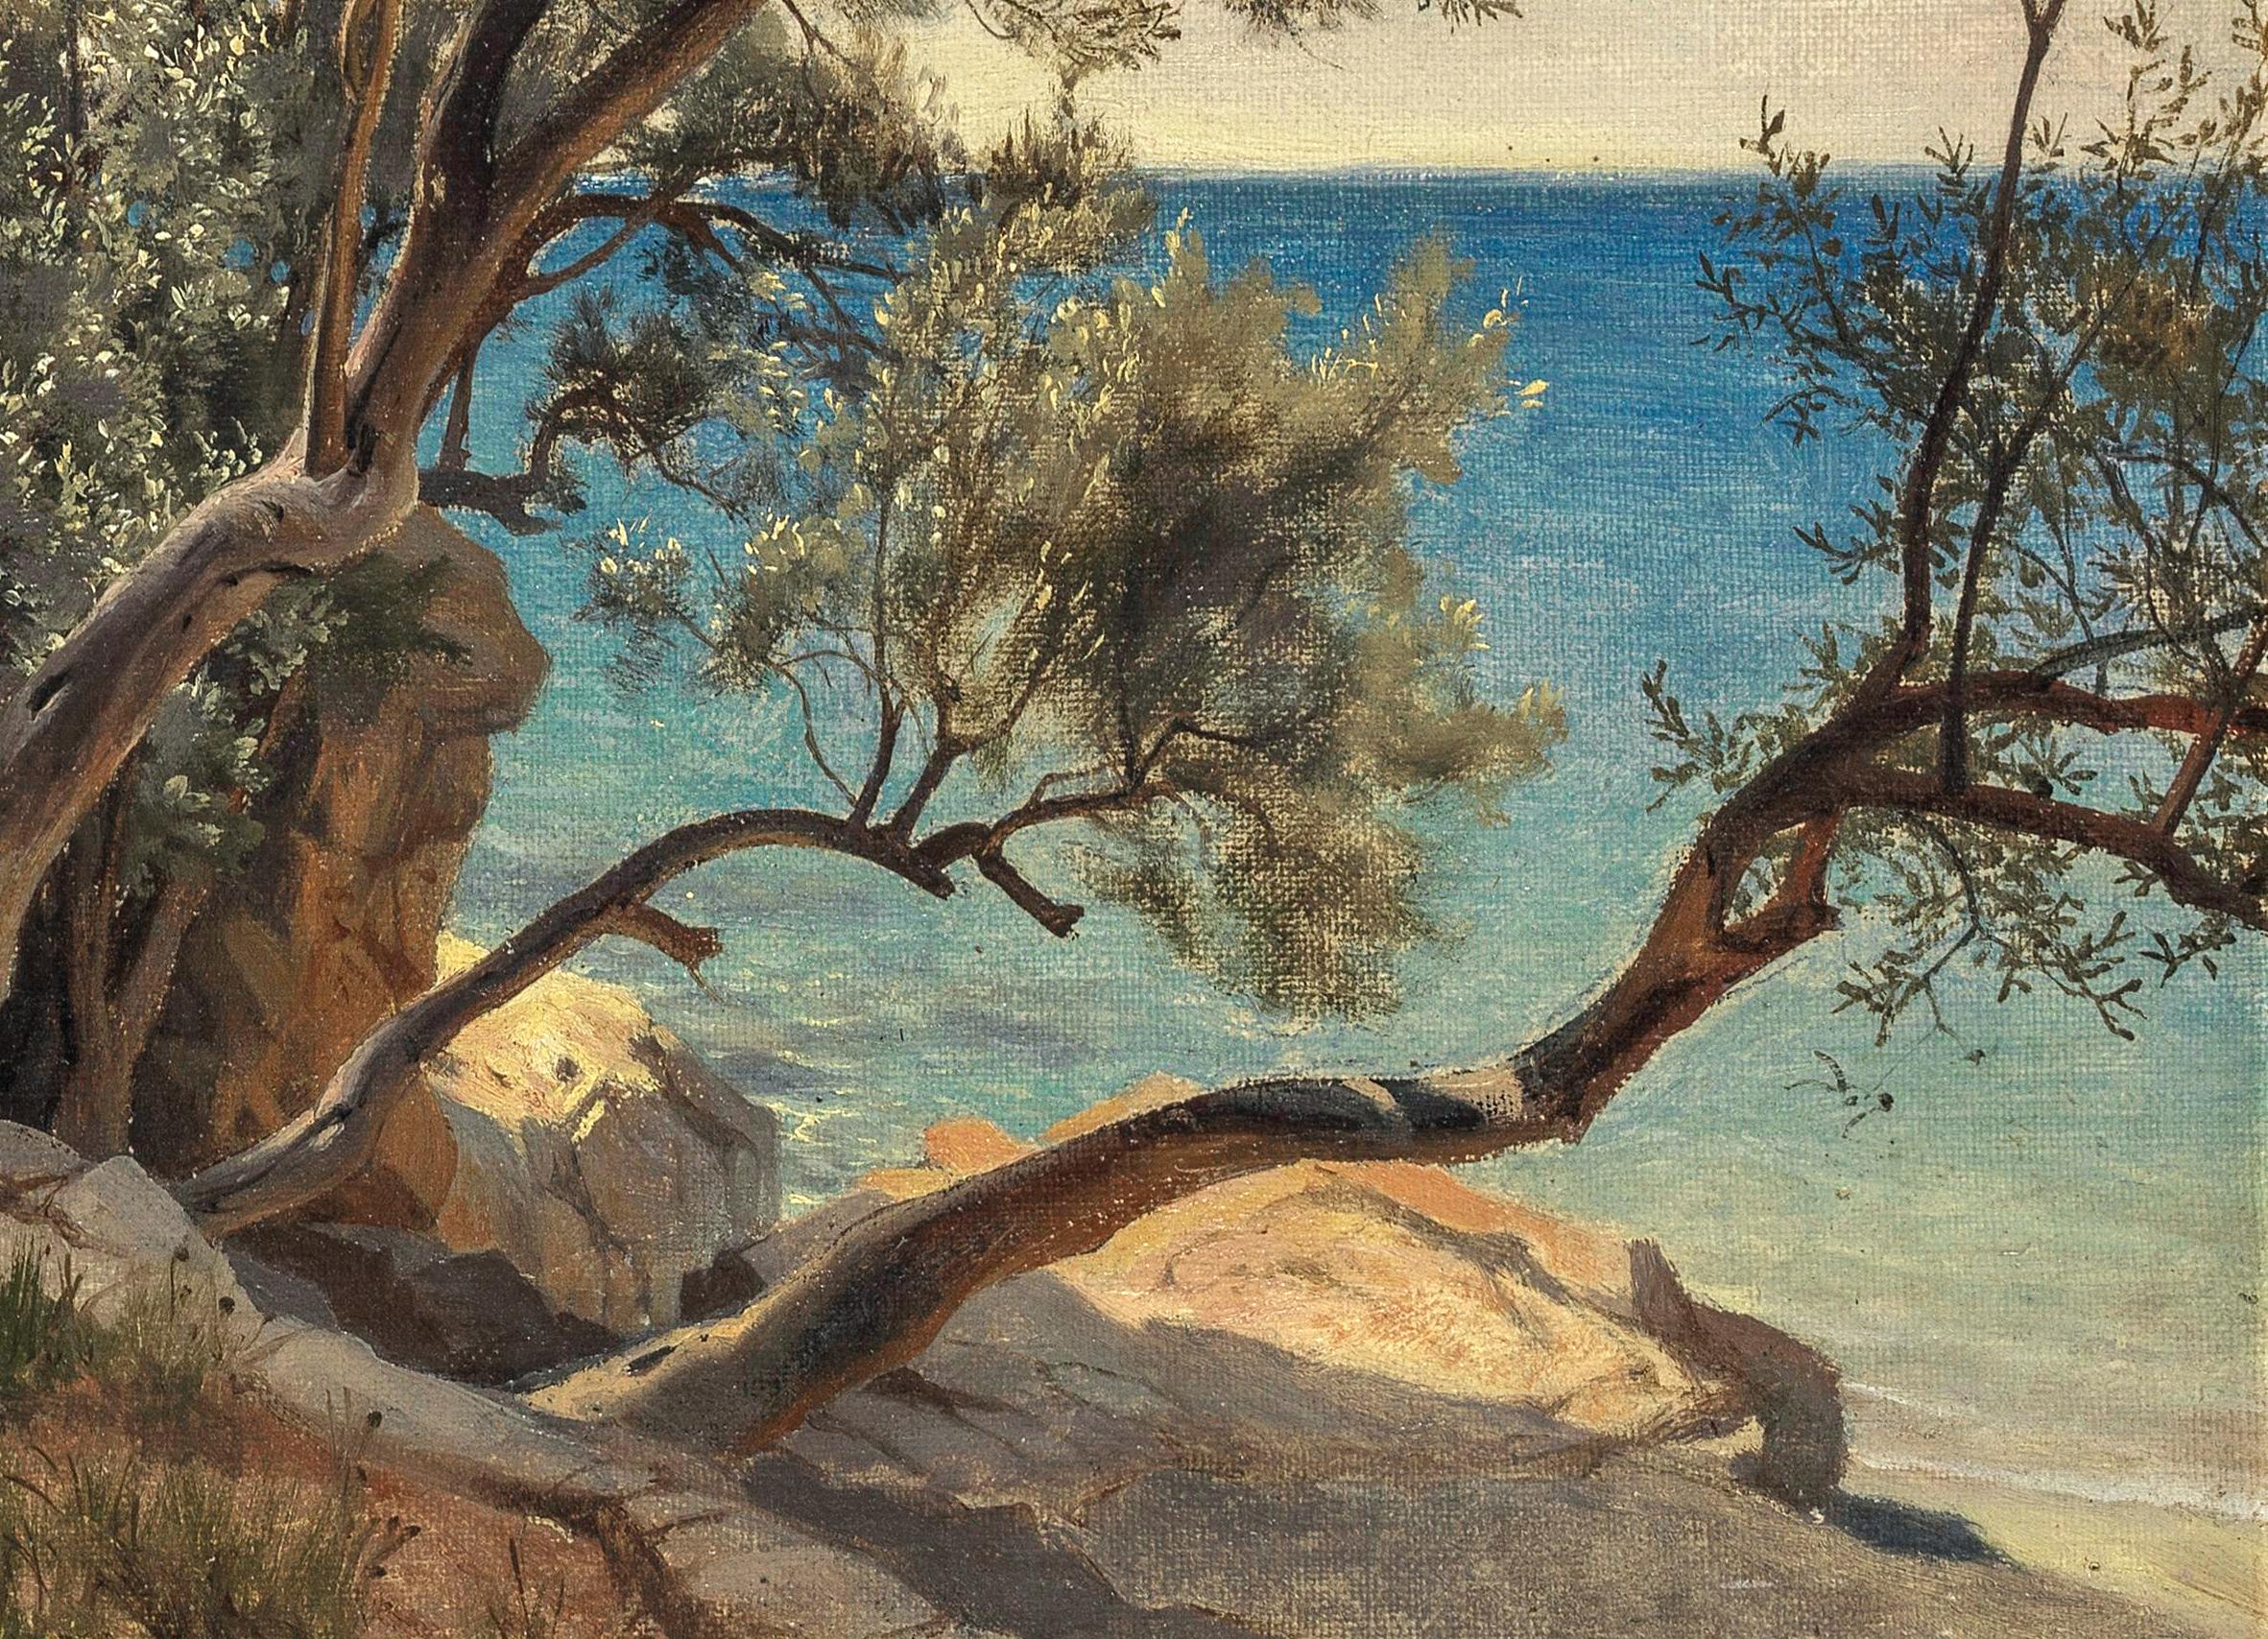 Mediterranean shore, probably the French Riviera - Painting by Arthur Calame